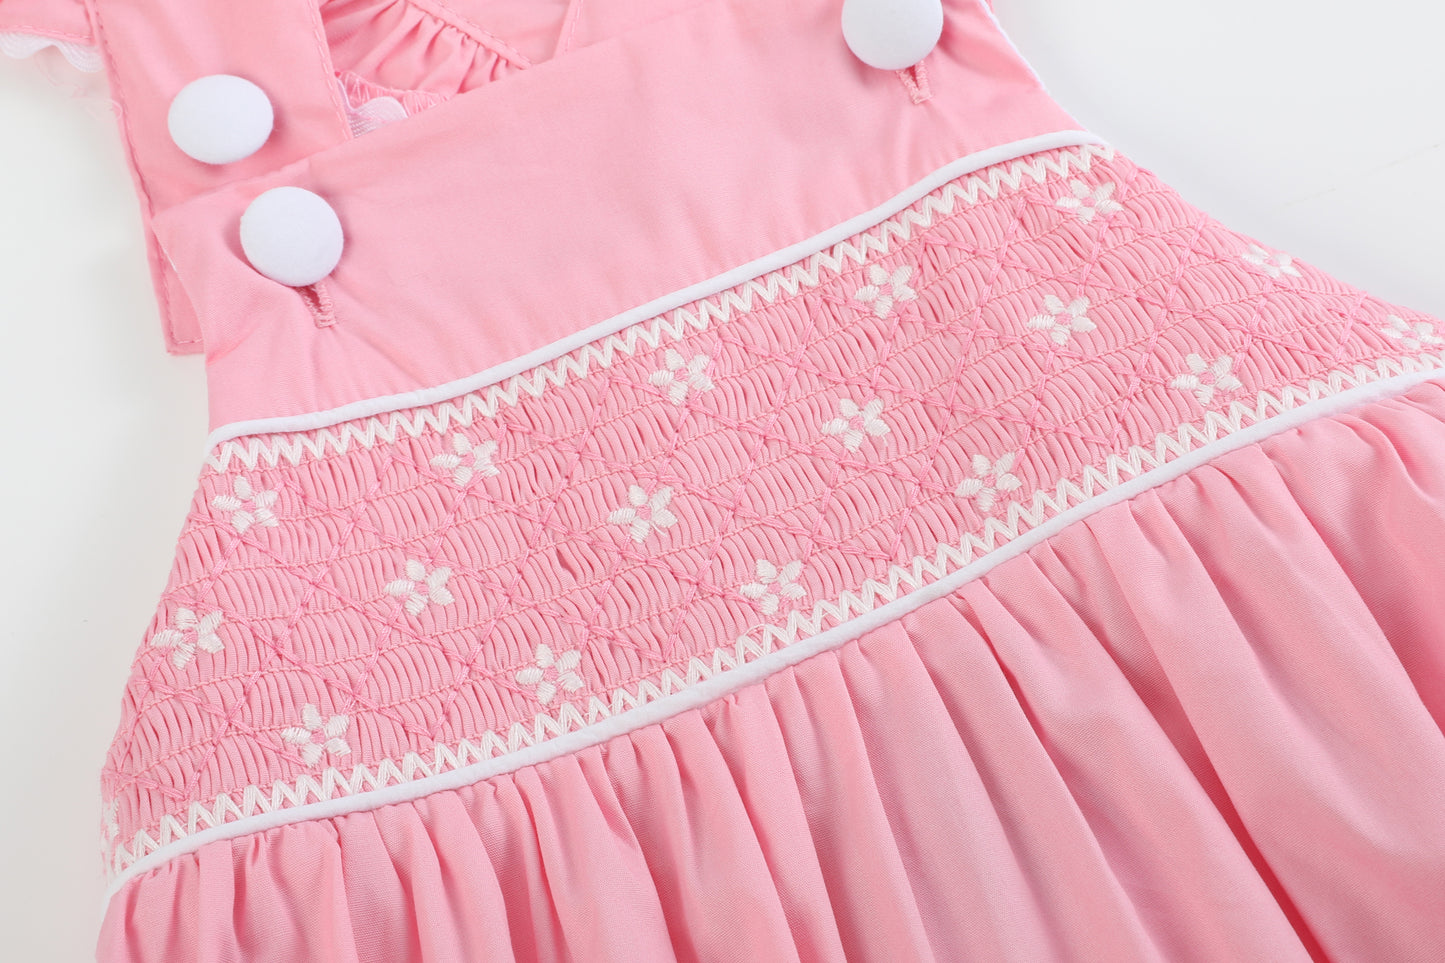 Pink and White Flower Smocked Ruffle Romper